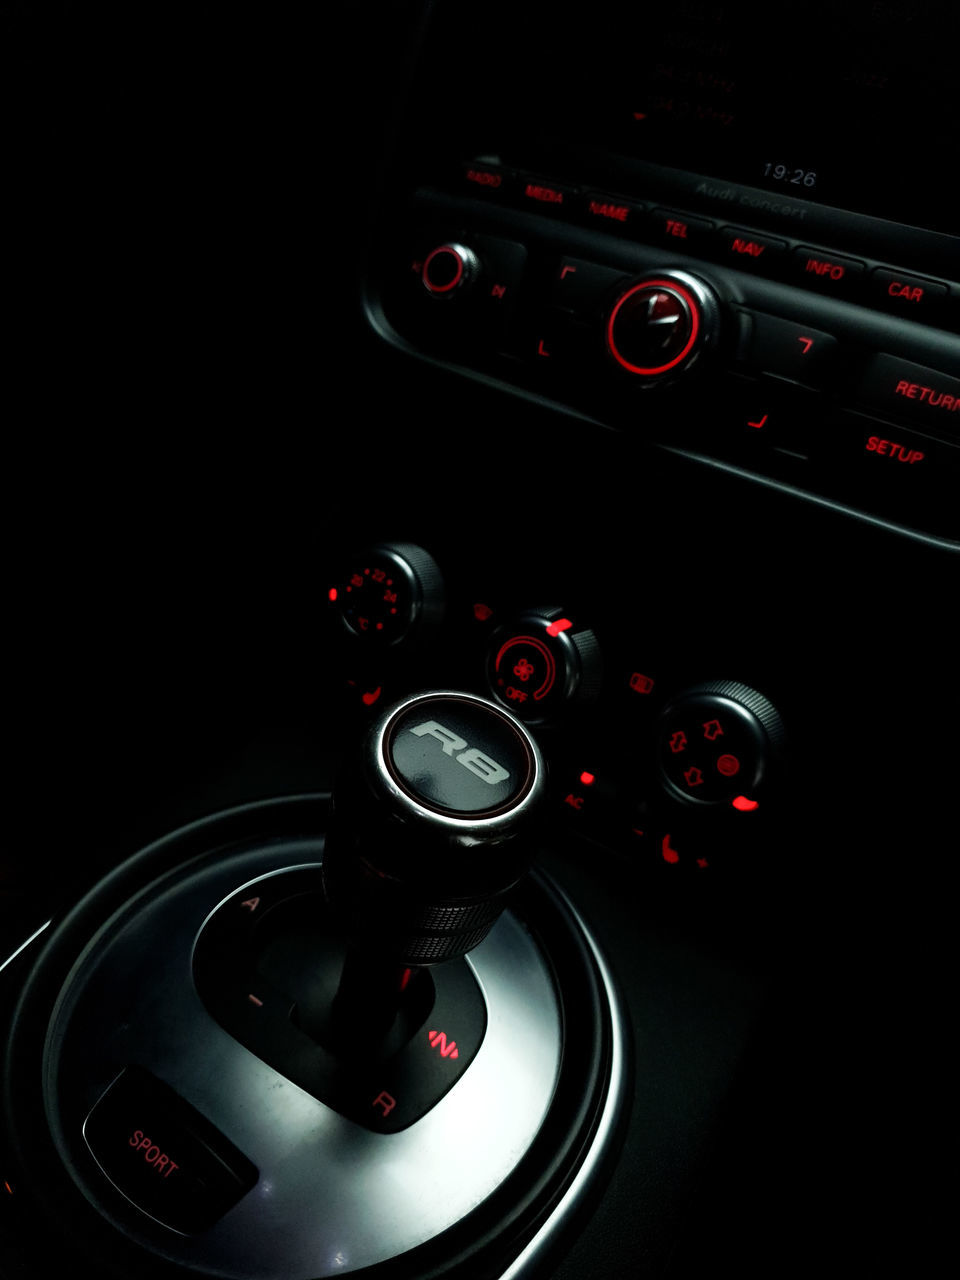 car, vehicle, control, technology, indoors, no people, control panel, red, music, black background, close-up, arts culture and entertainment, audio equipment, black, gear shift, joystick, equipment, land vehicle